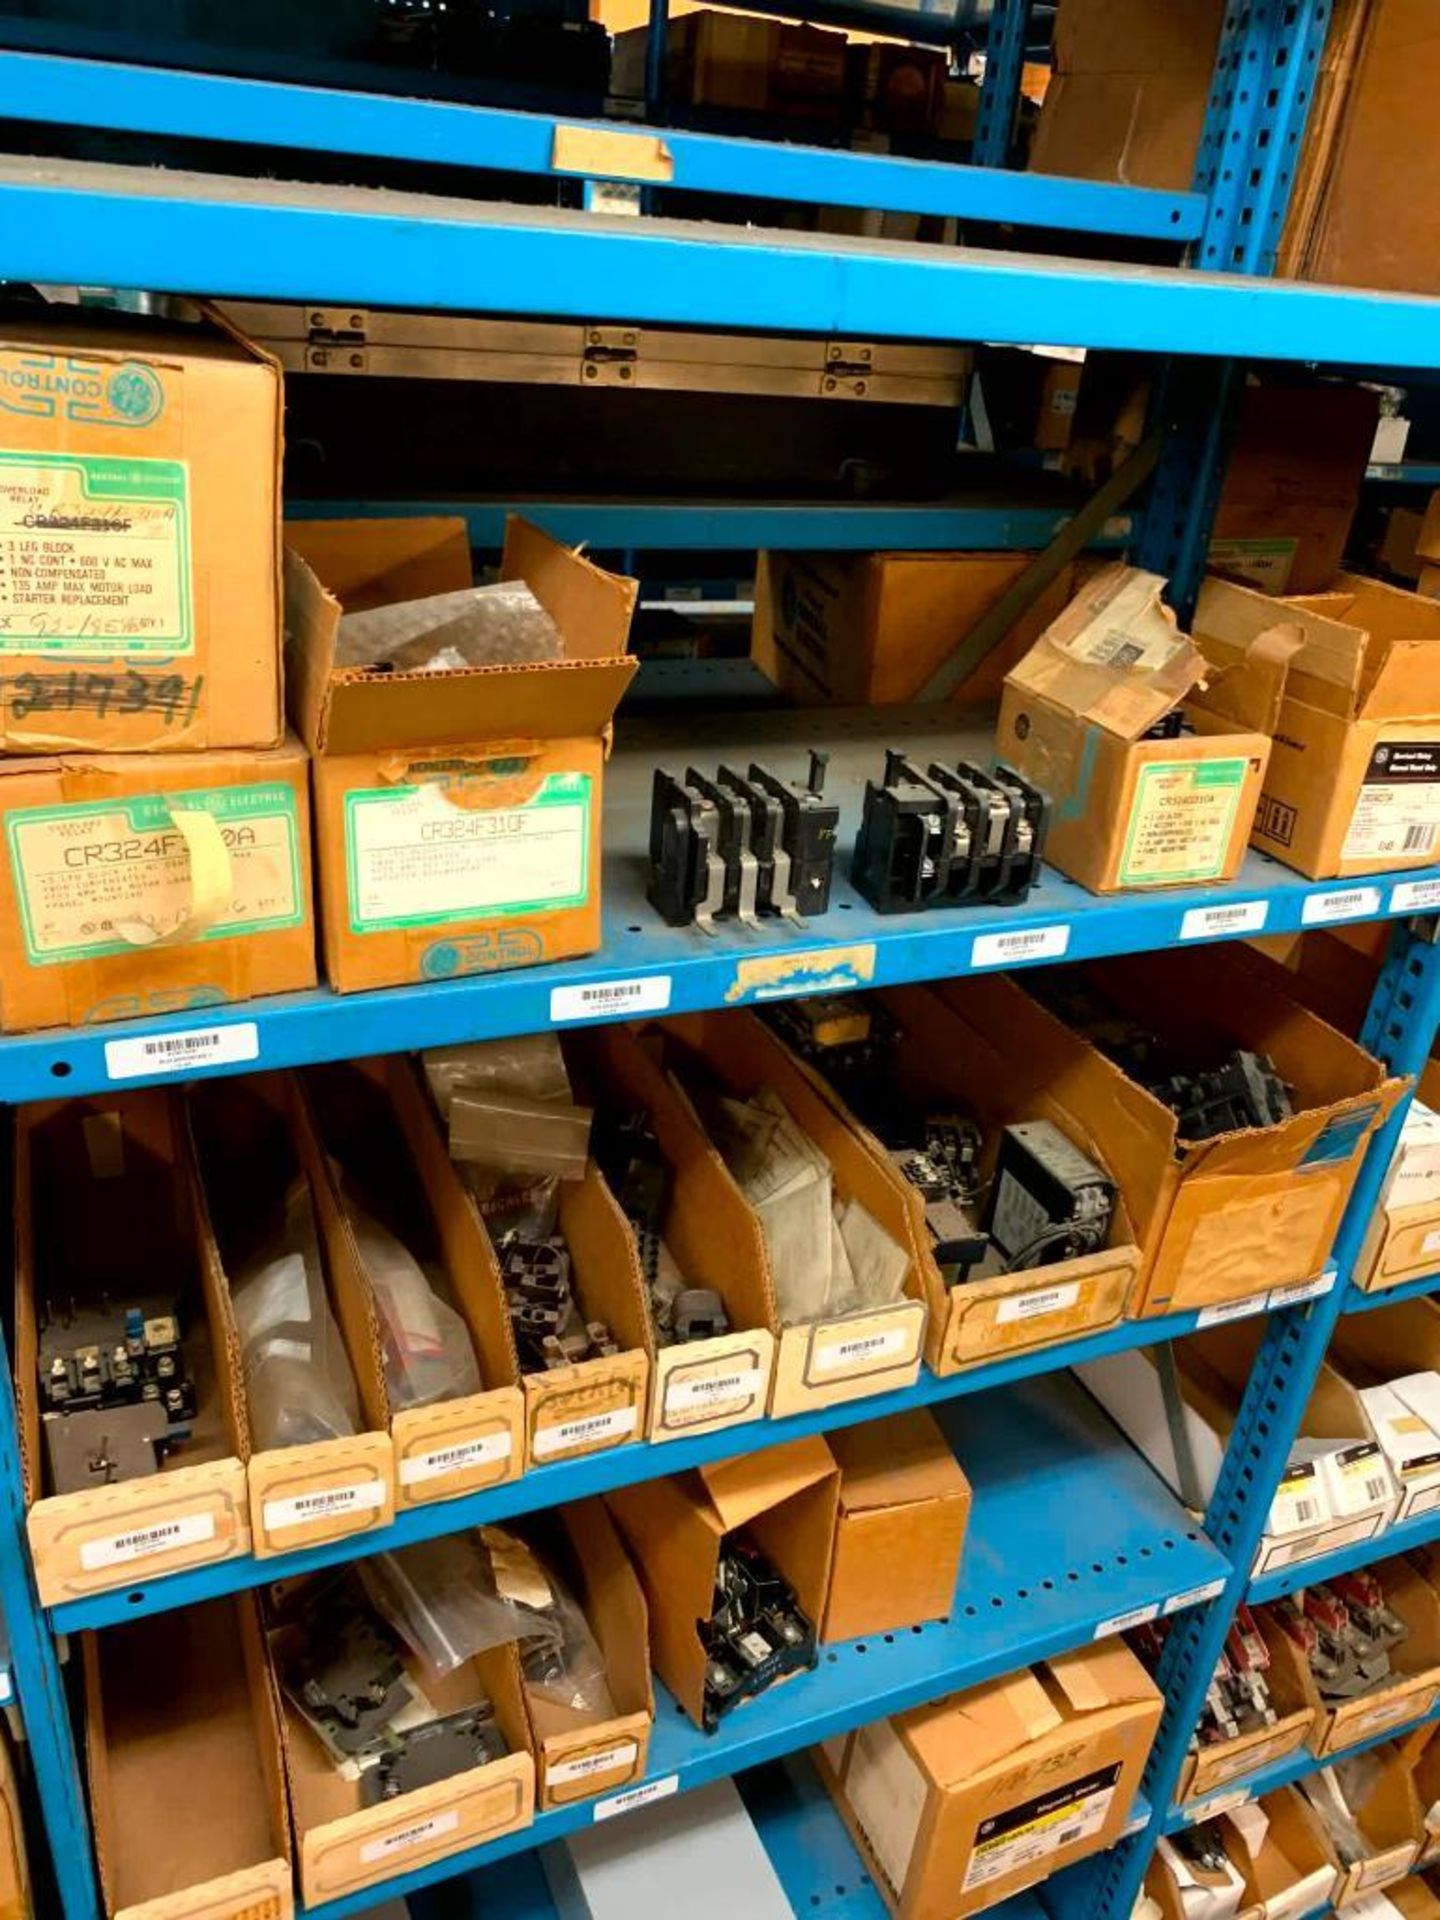 Content on (22) Bays of Clip Shelving: Transformers, Safety Switches, Magnetic Starters, Enclosures, - Image 17 of 74